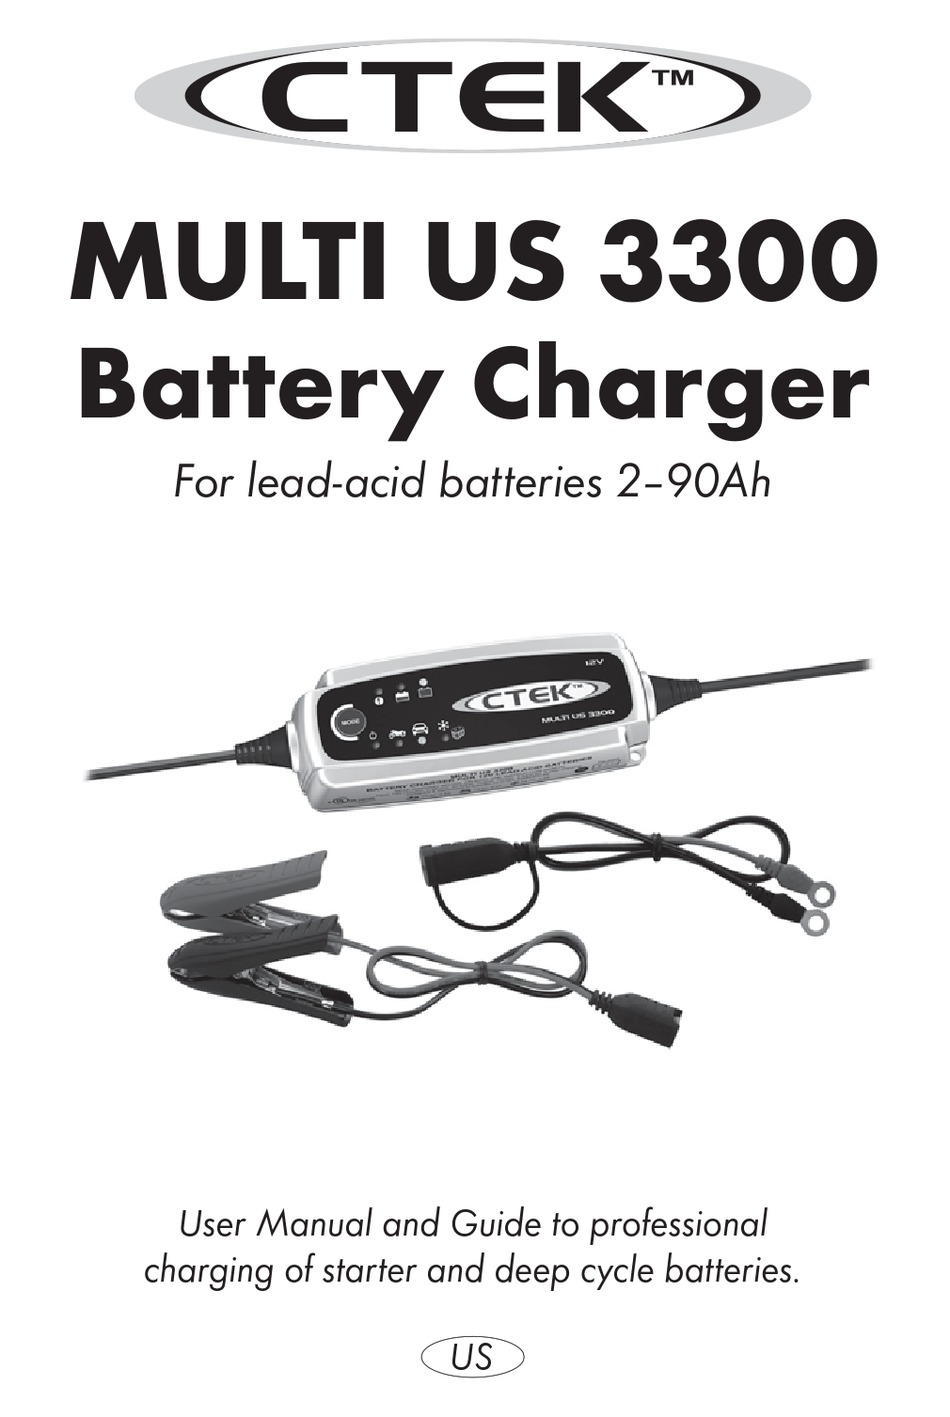 BATTERY MULTI CHARGER User Manual